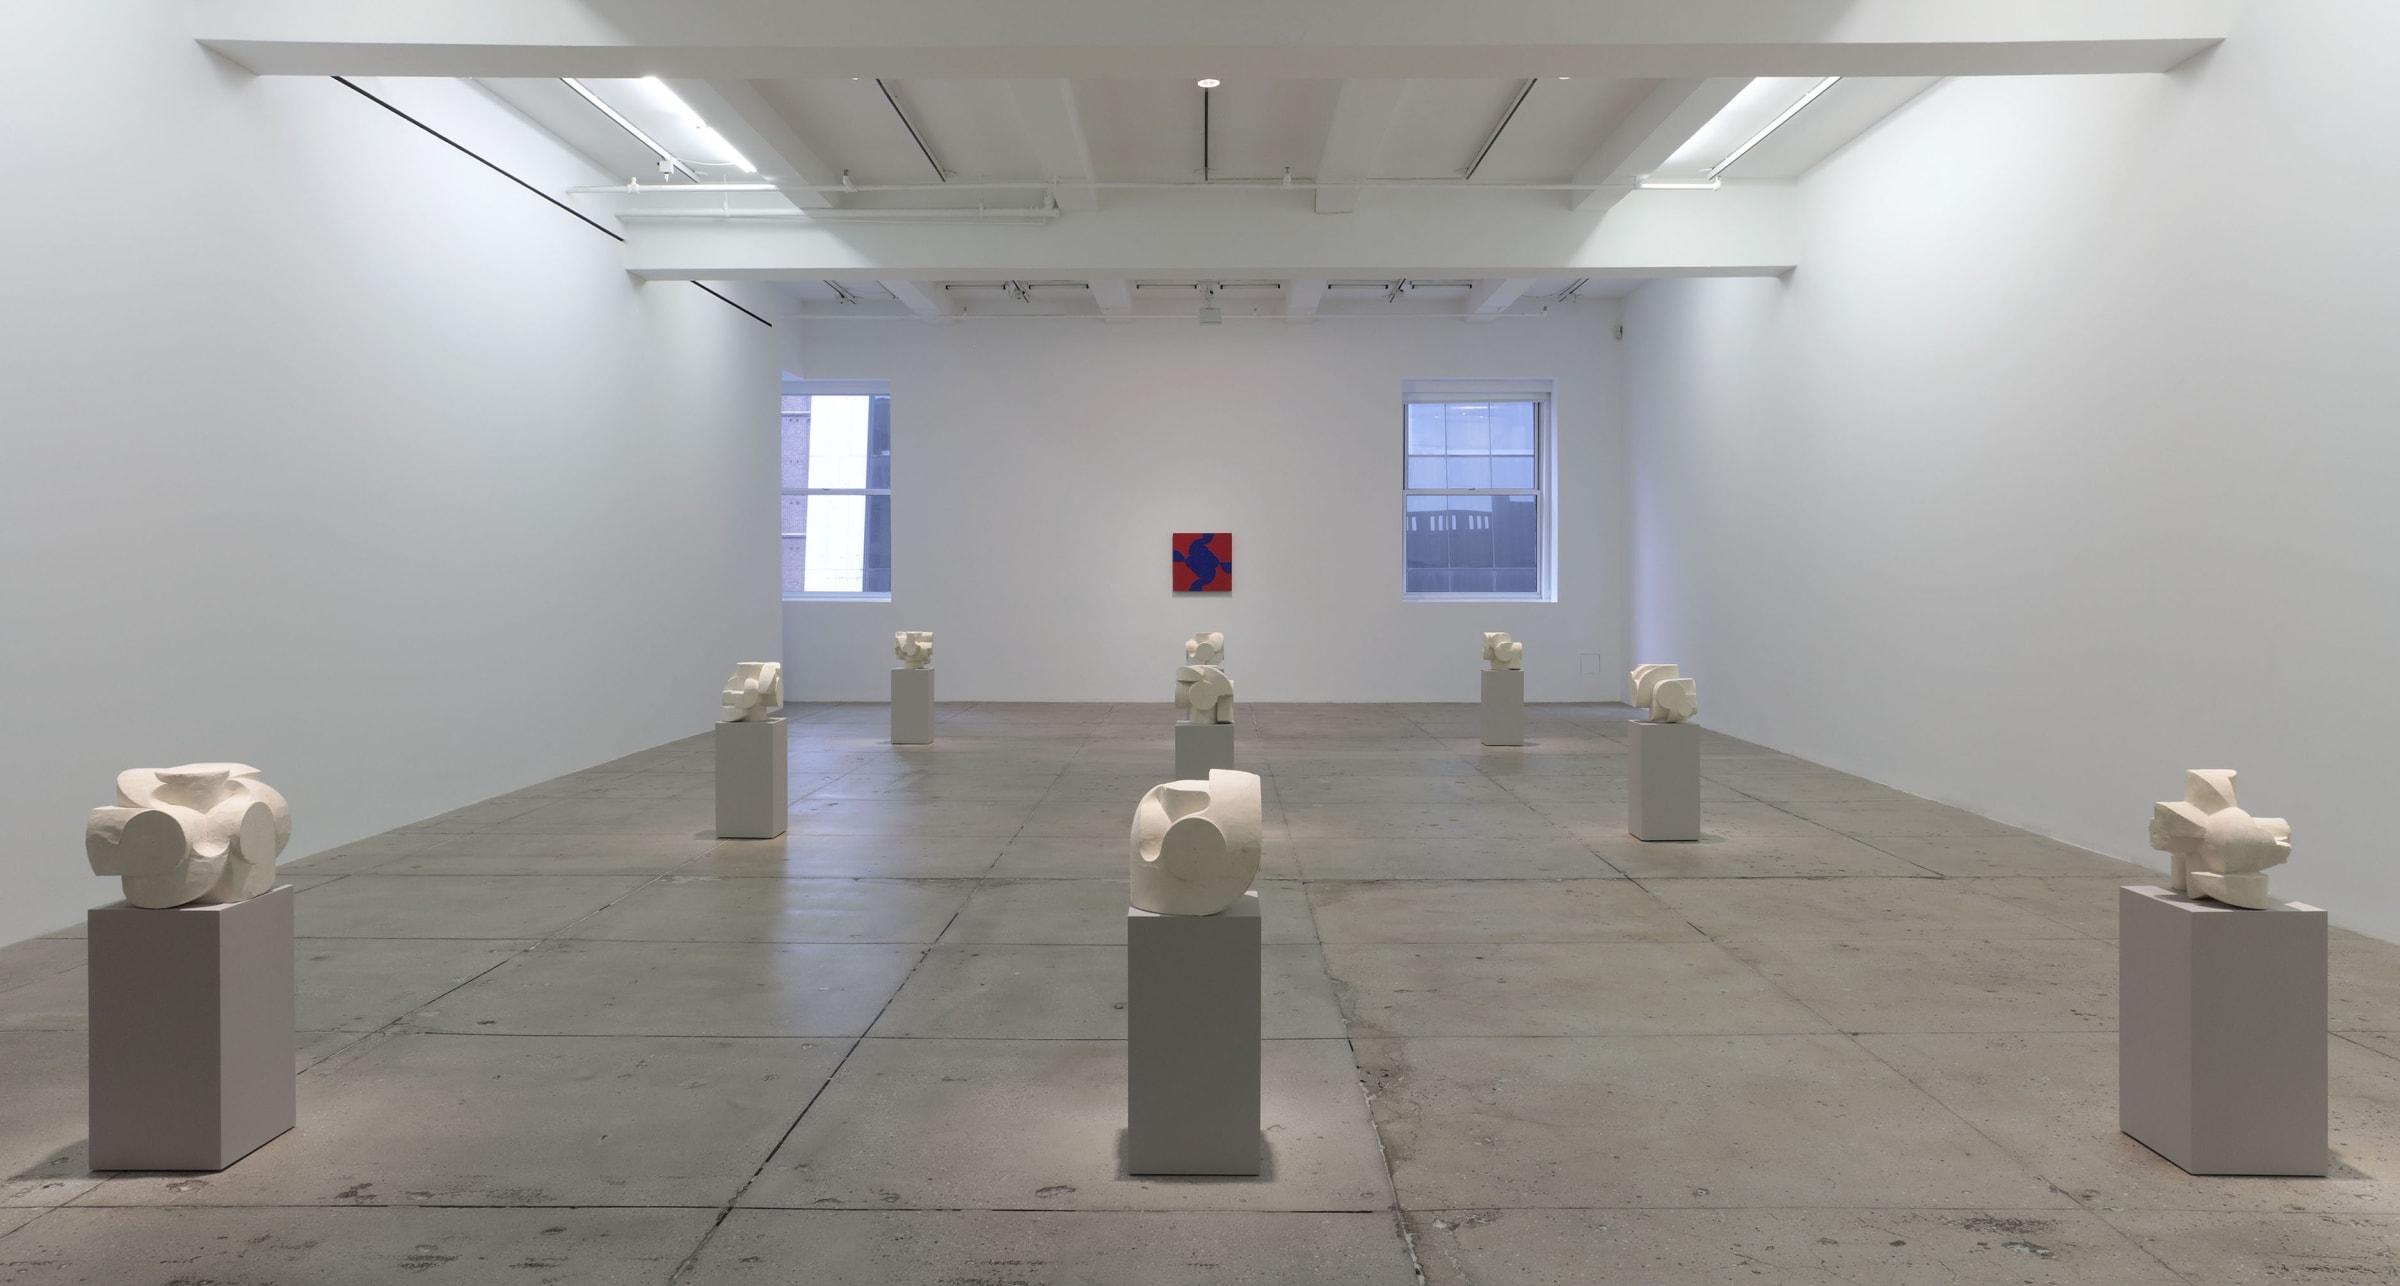 8 small white stone sculptures on pedestals in front of a red abstract painting on a white wall. 